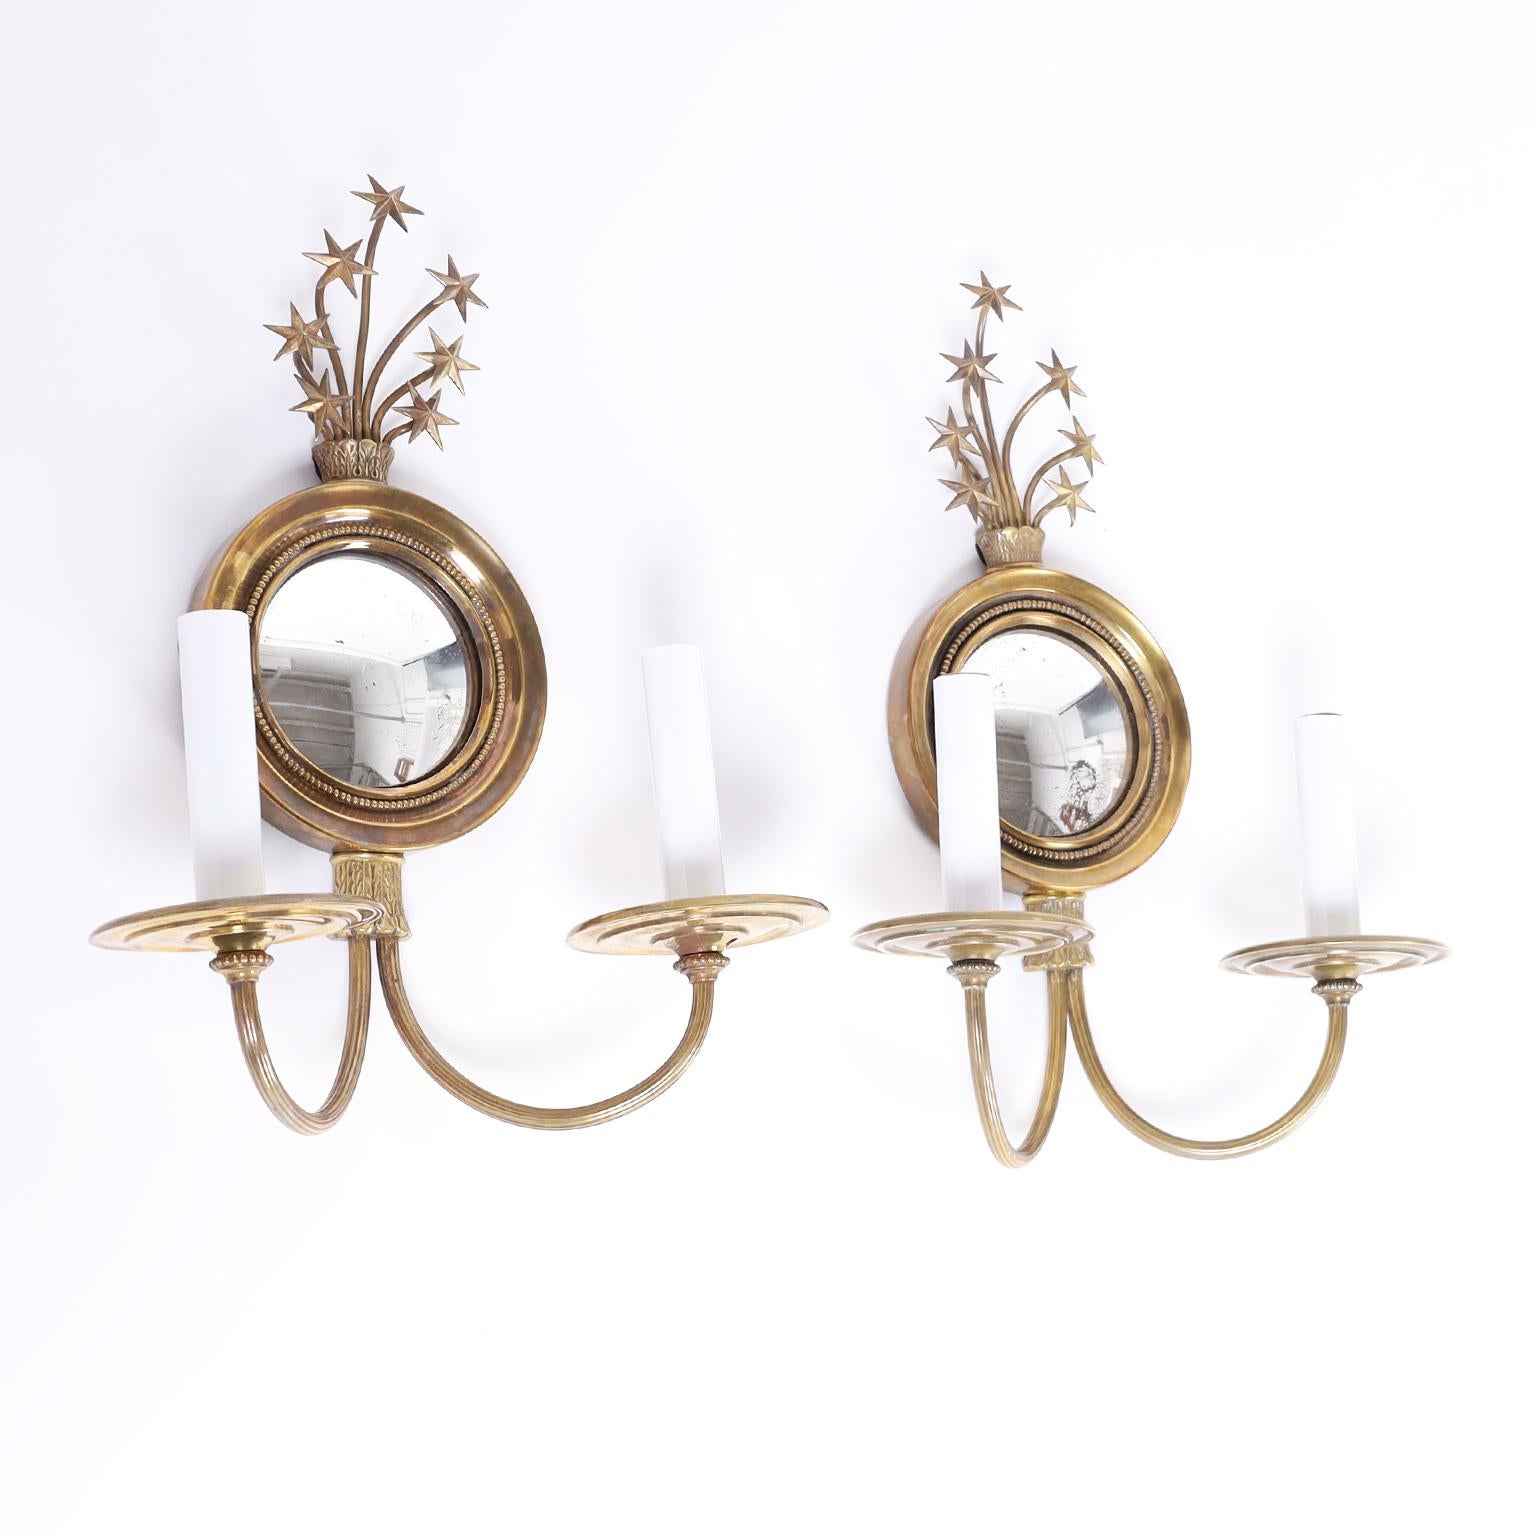 Pair of antique brass federal style two light wall sconces with convex mirrors and star bursts at the top, all in a tight classic form. As seen in the last photo of the listing, a similar metal pair is also available.